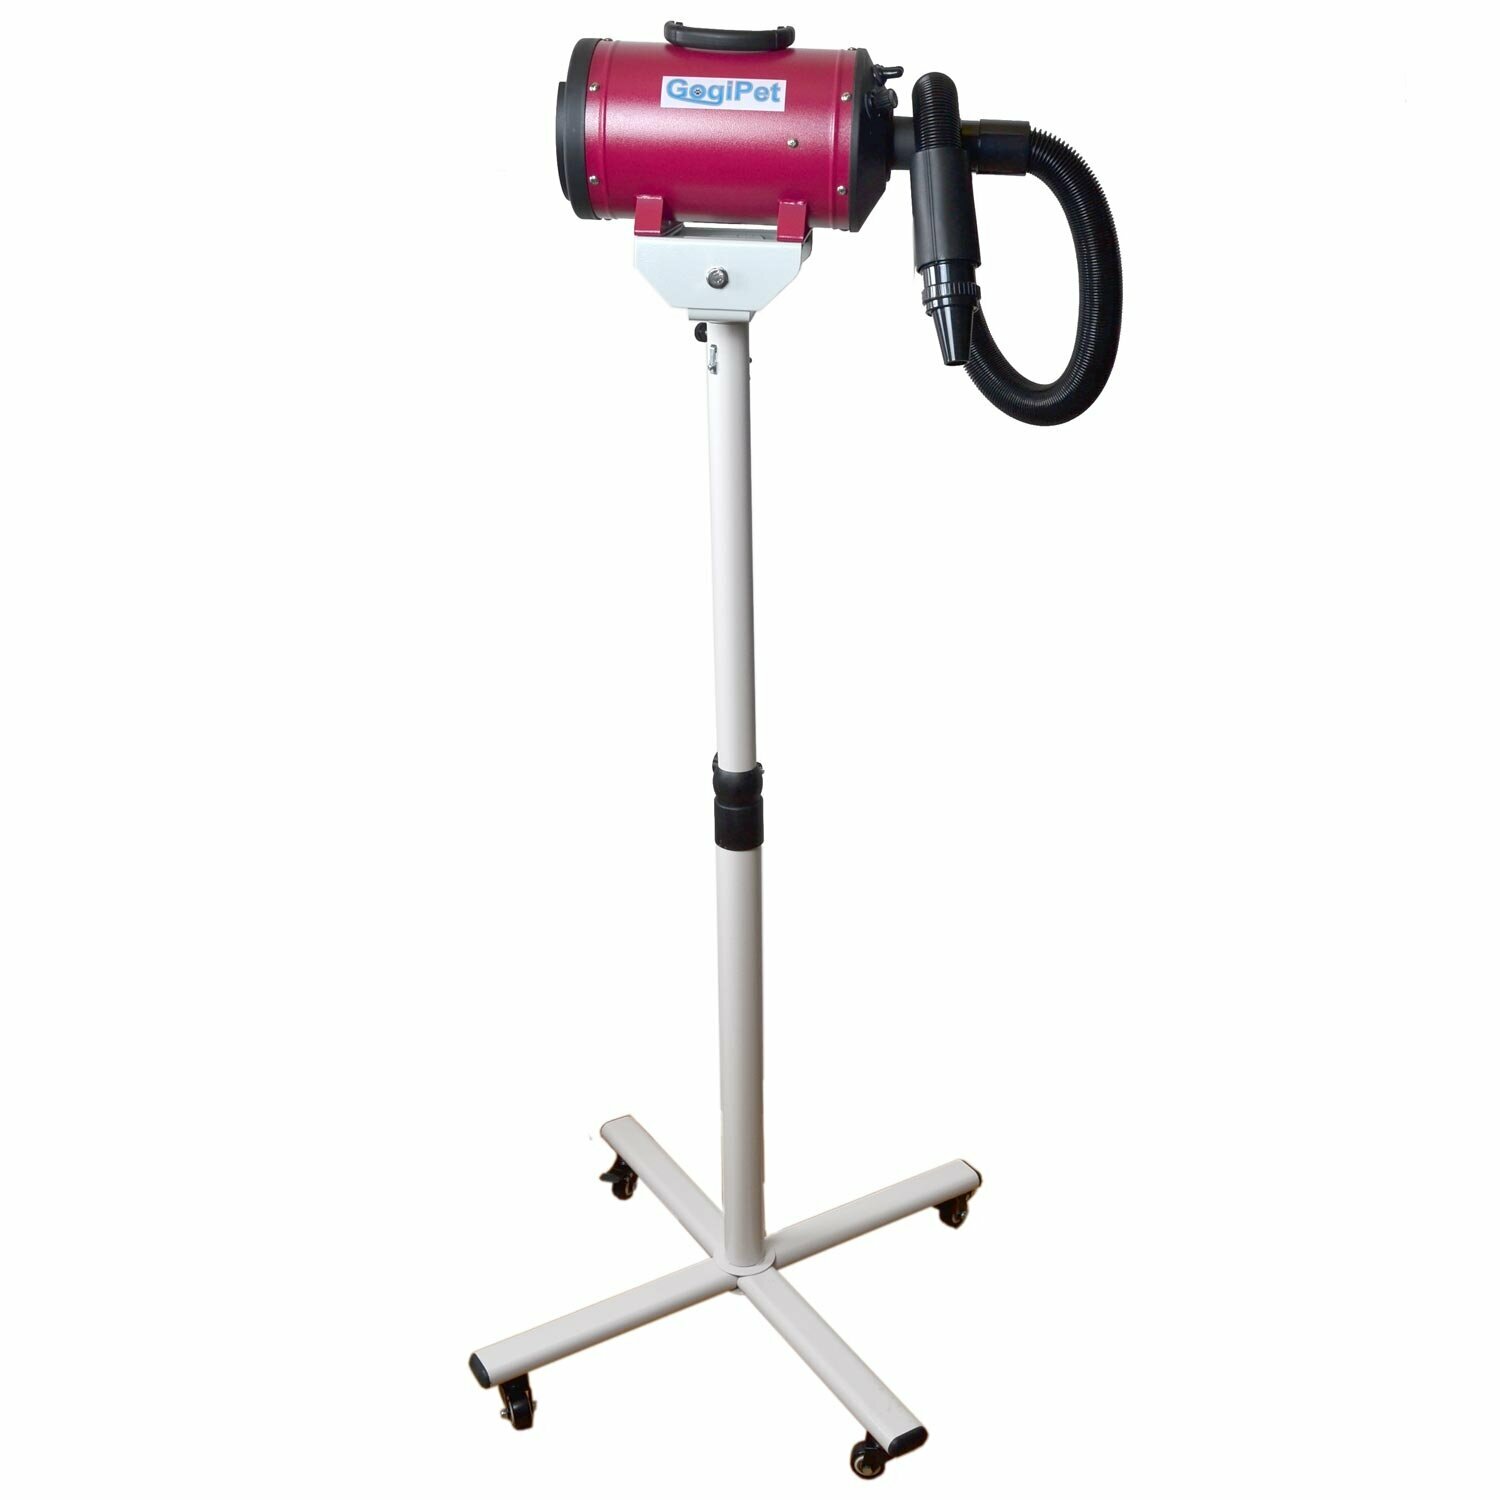 Floor dryer / blower from GogiPet in red